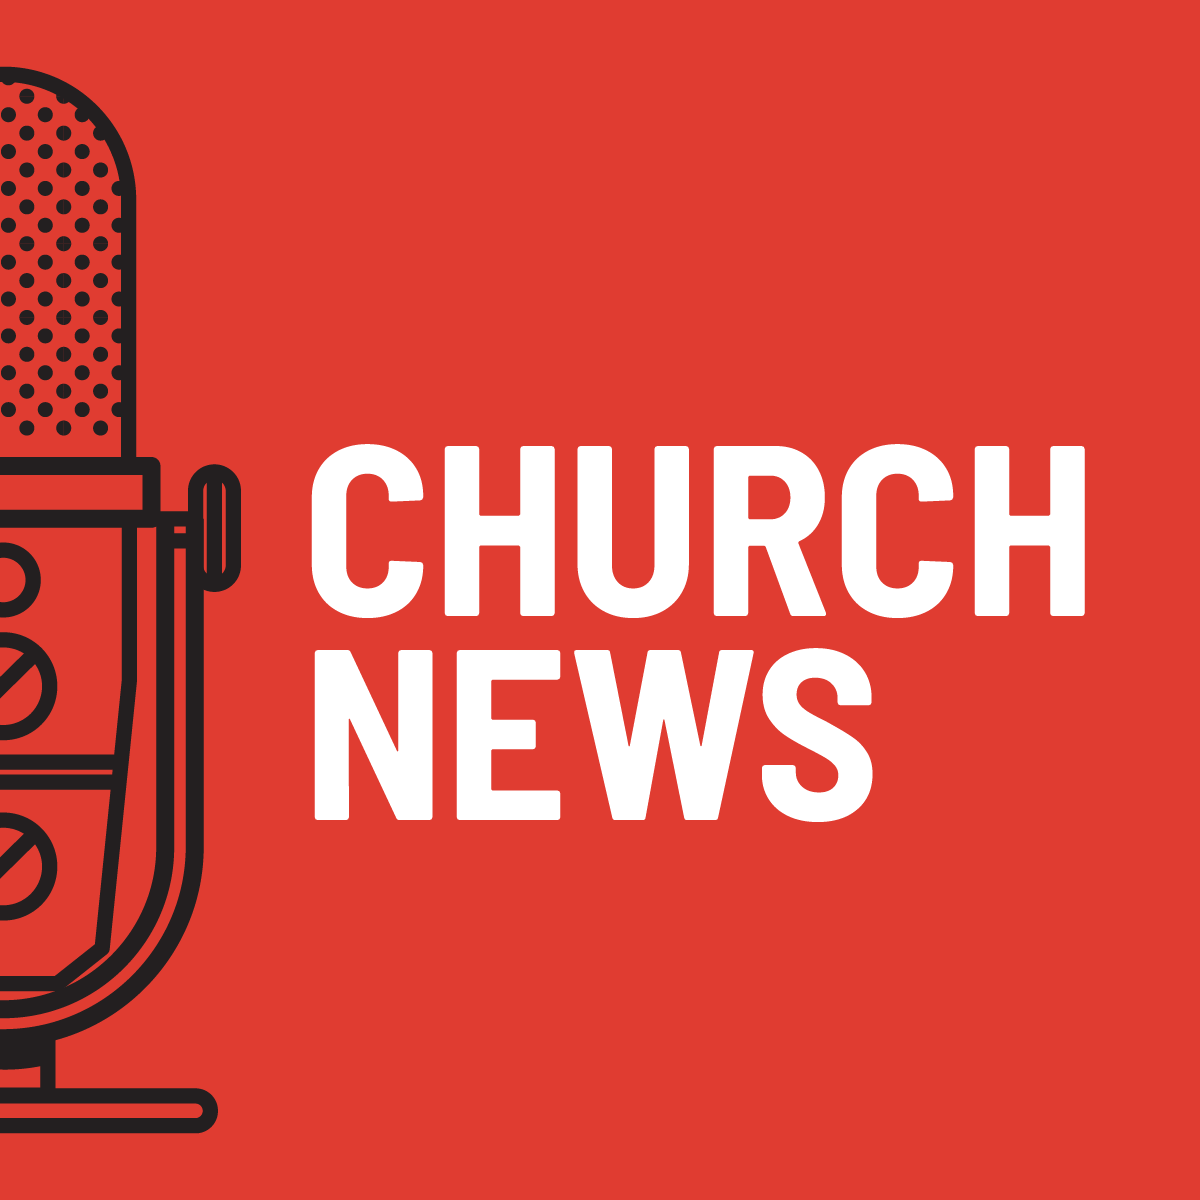 Church News editor Ryan Jensen on finding purpose in gospel principles amid life’s ups and downs